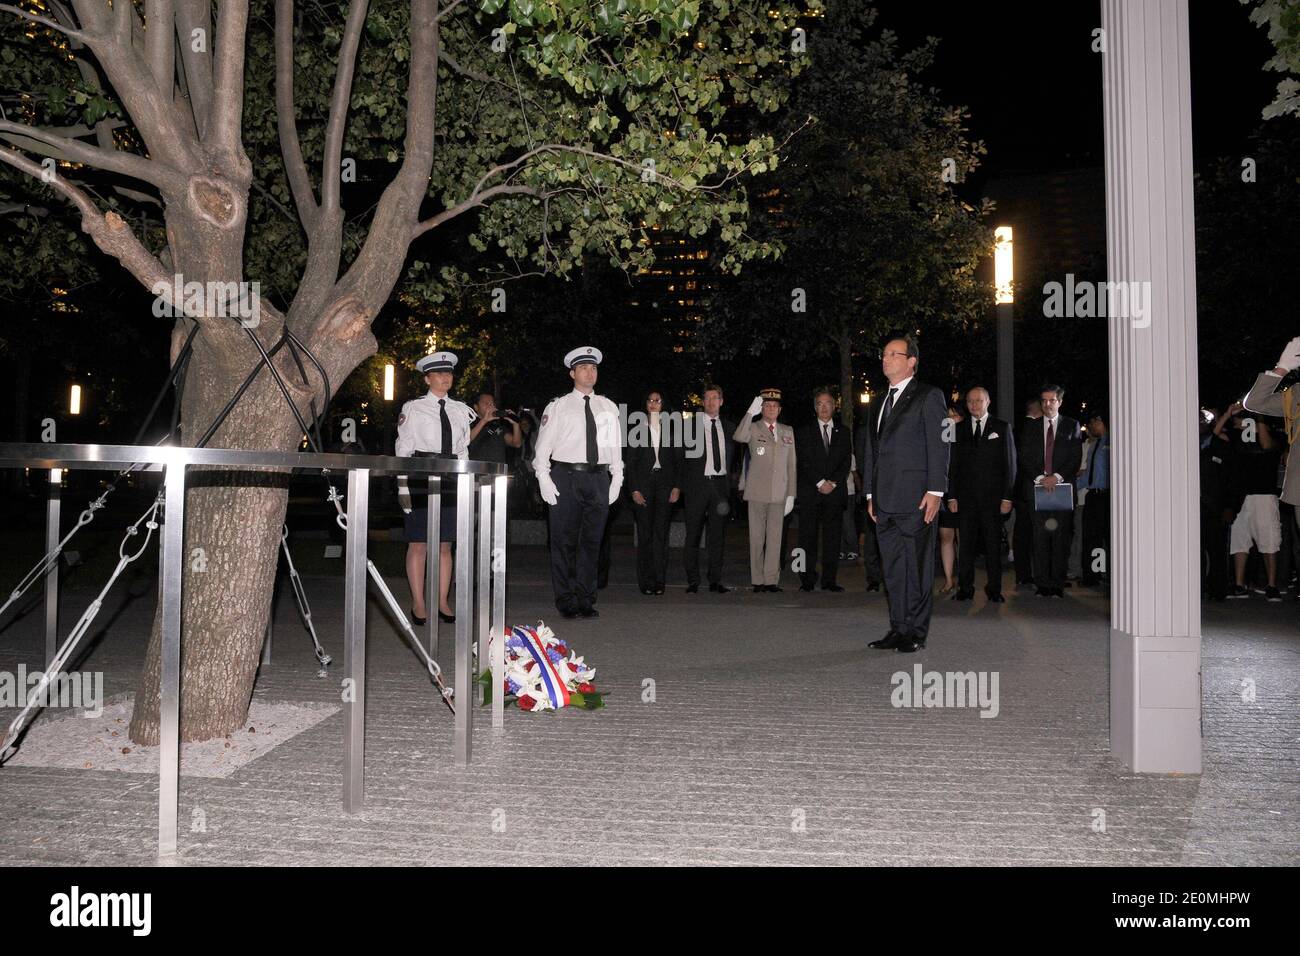 French President Francois Hollande stand in silence after laying a memorial wreath during his visit to the Ground Zero 911 Memorial Park on September 25, 2012, New York, NY, USA. Photo by Anthony Behar/Pool/ABACAPRESS.COM Stock Photo